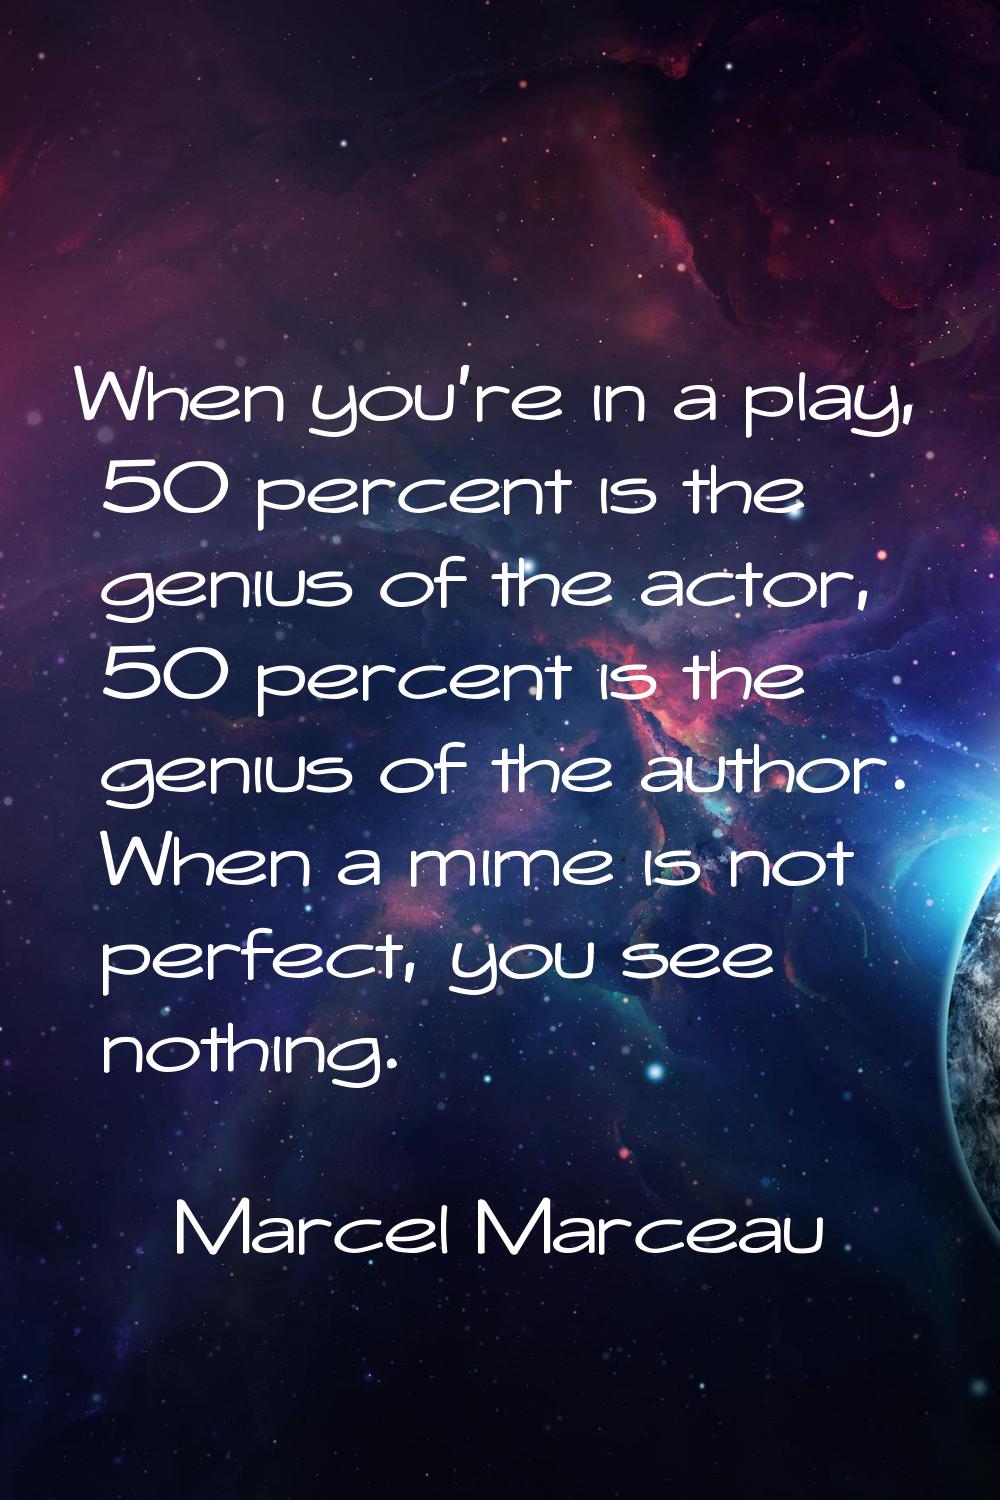 When you're in a play, 50 percent is the genius of the actor, 50 percent is the genius of the autho